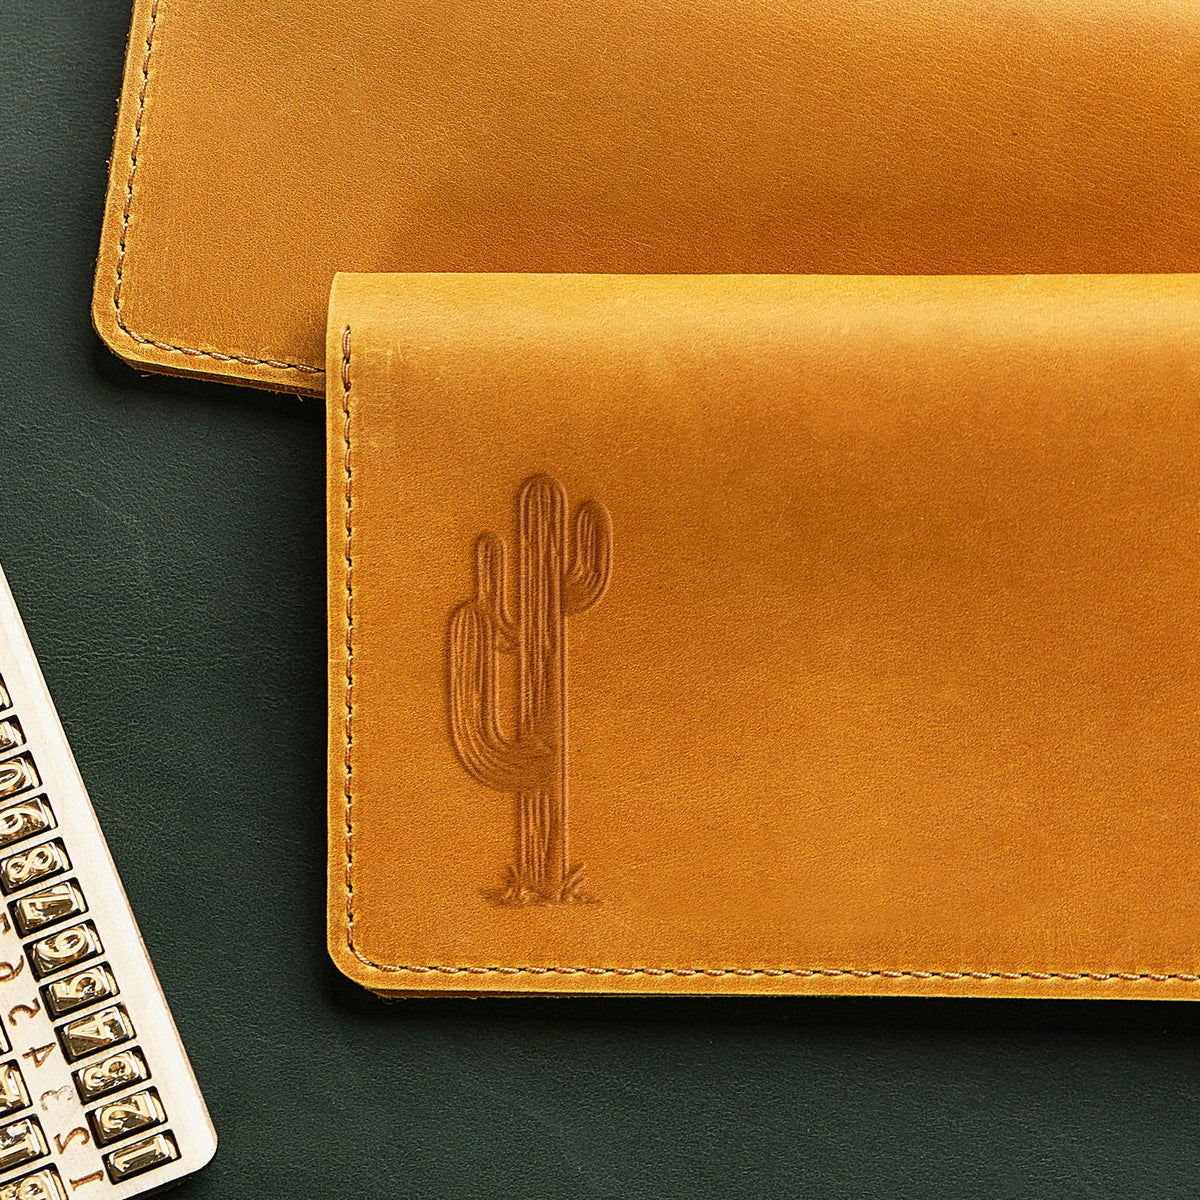 Cactus Delrin Leather Stamp